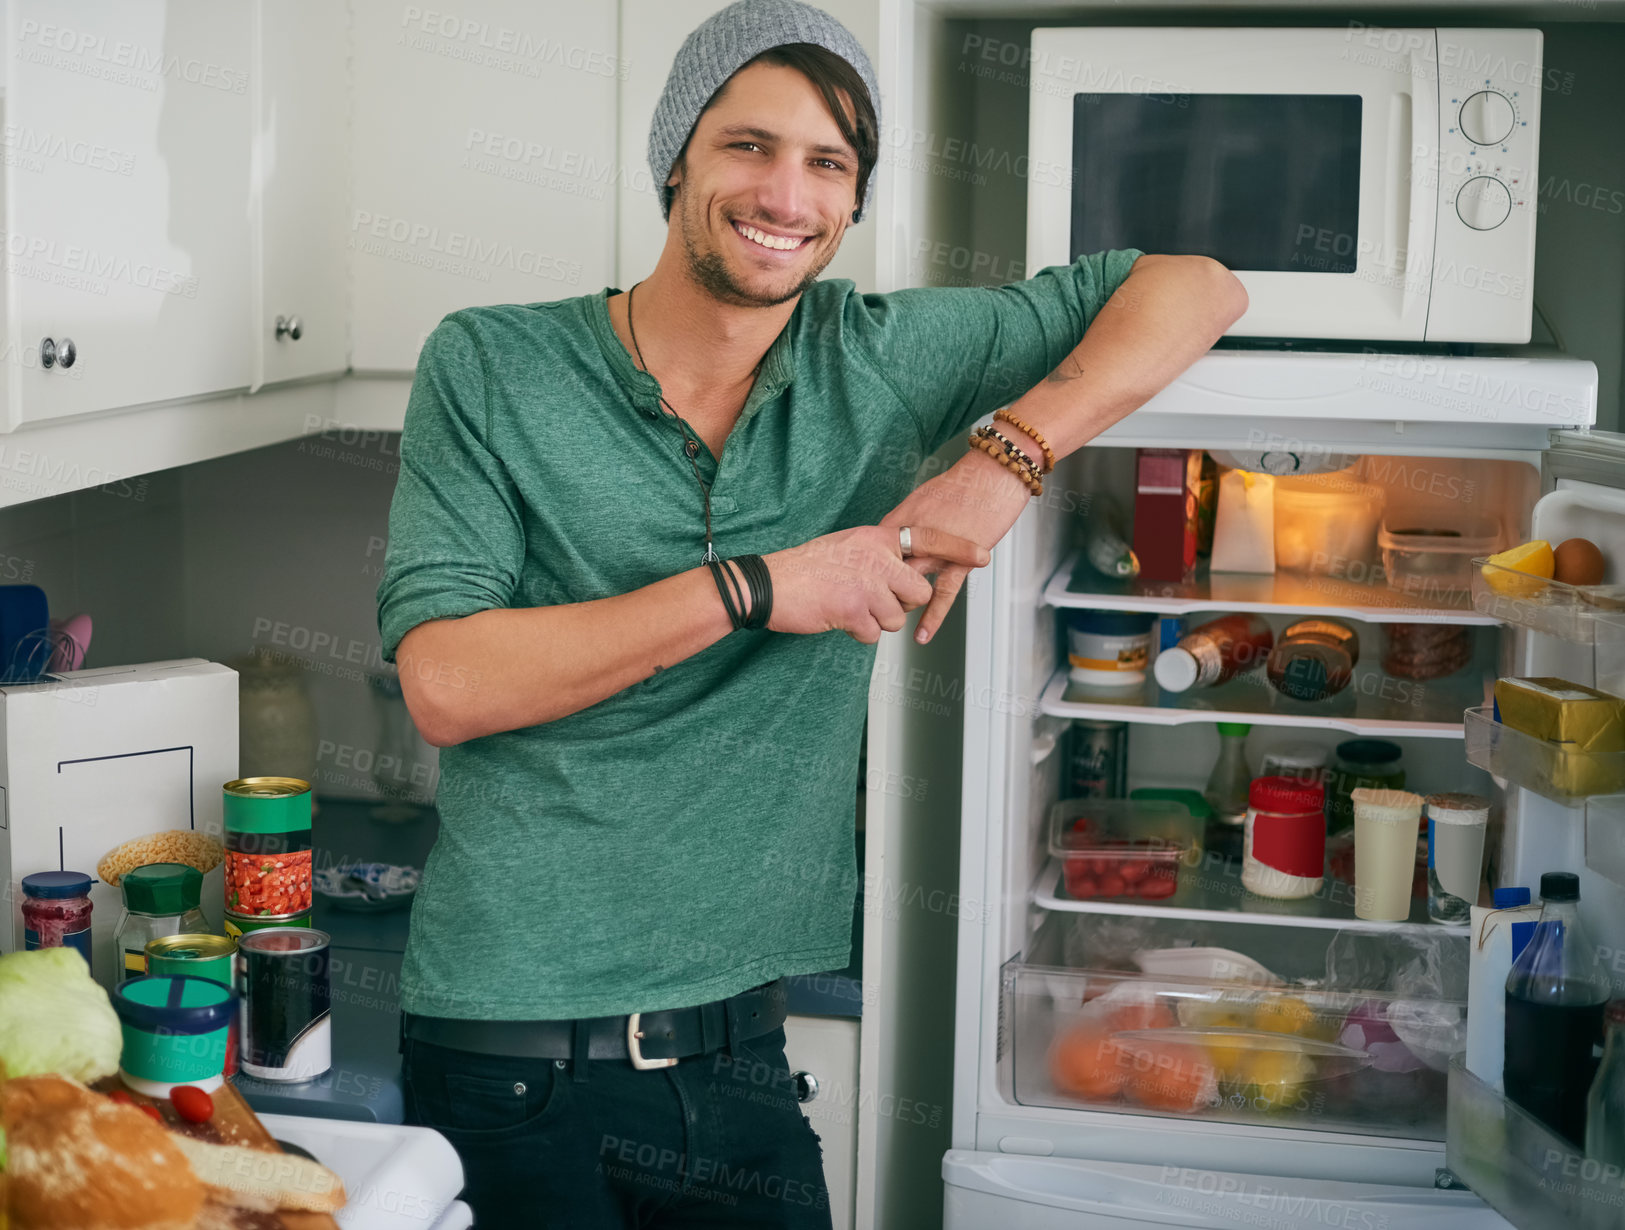 Buy stock photo Portrait of a smiling young man standing by an open fridge in his kitchen